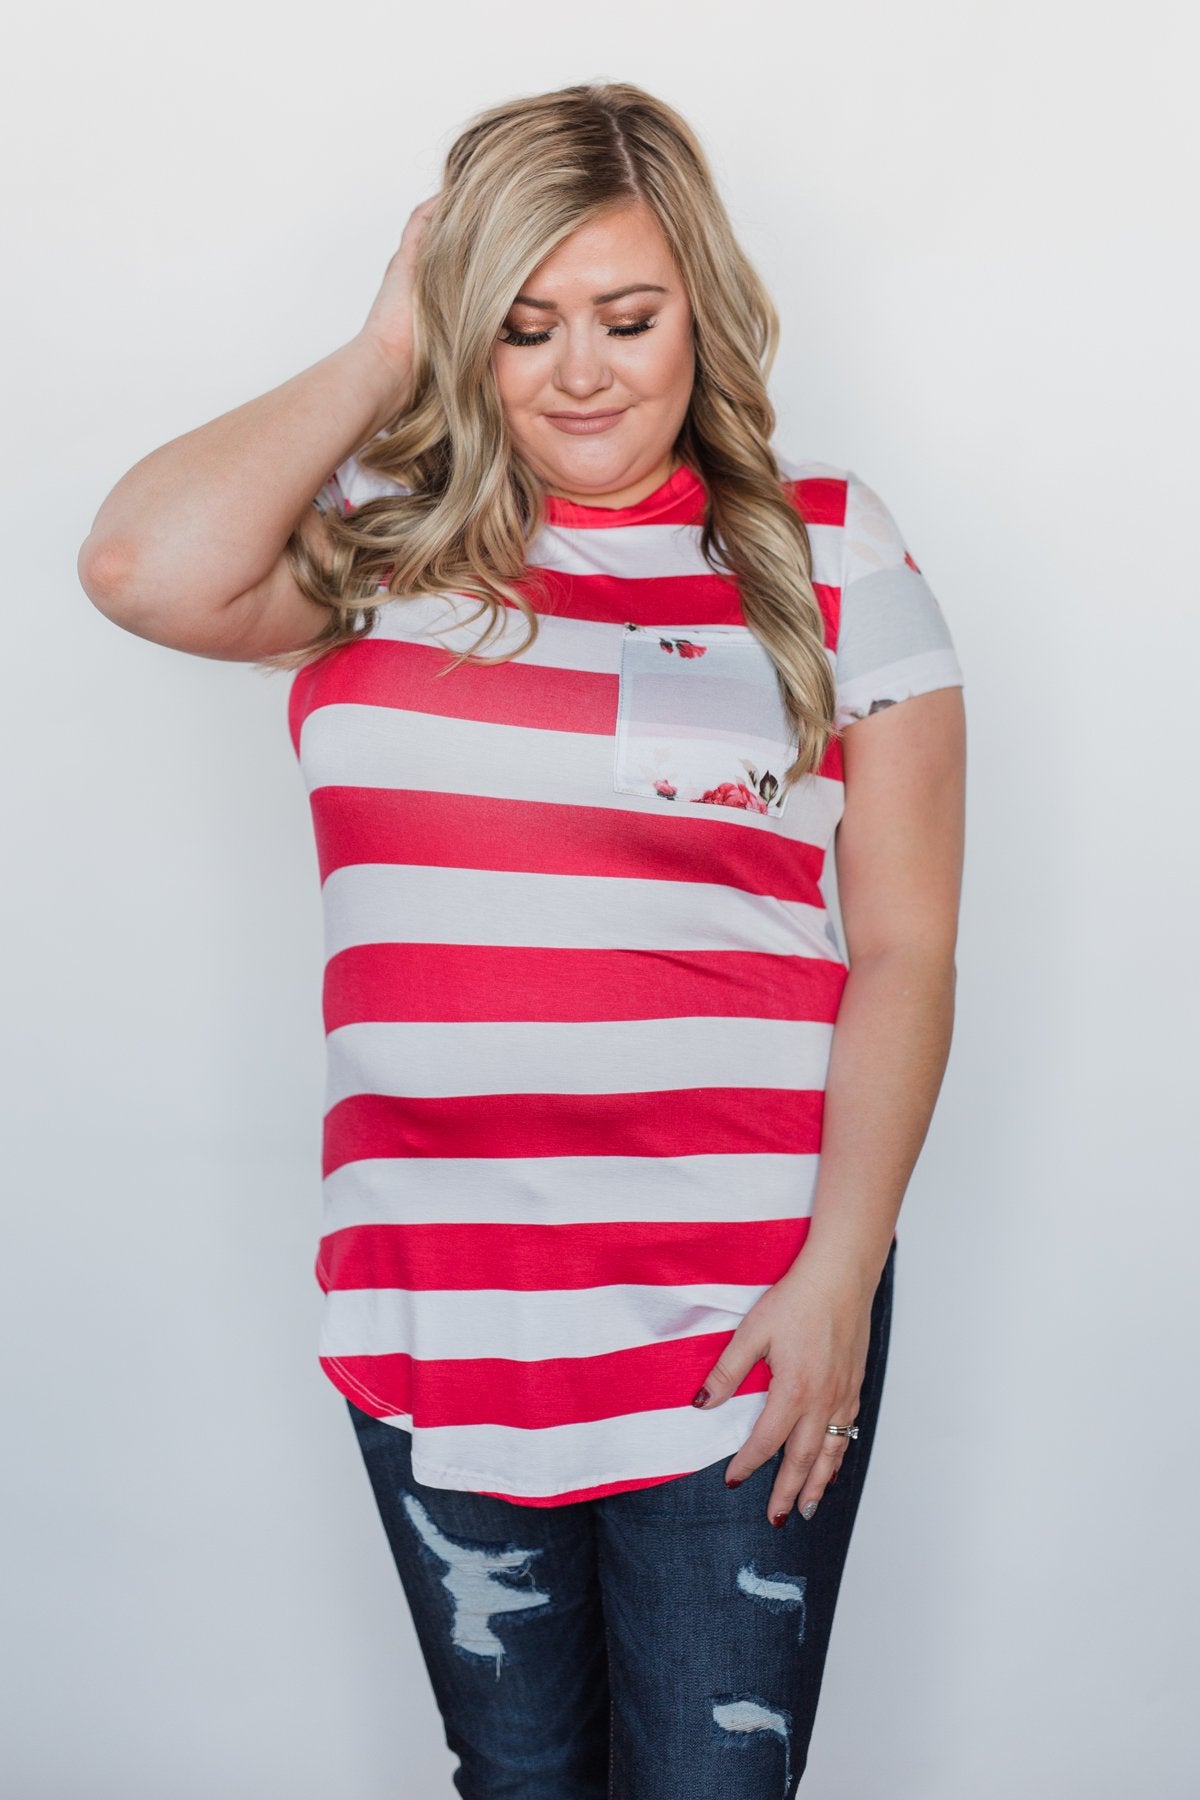 Dare to be Bold Floral & Stripes Top - Bright Strawberry